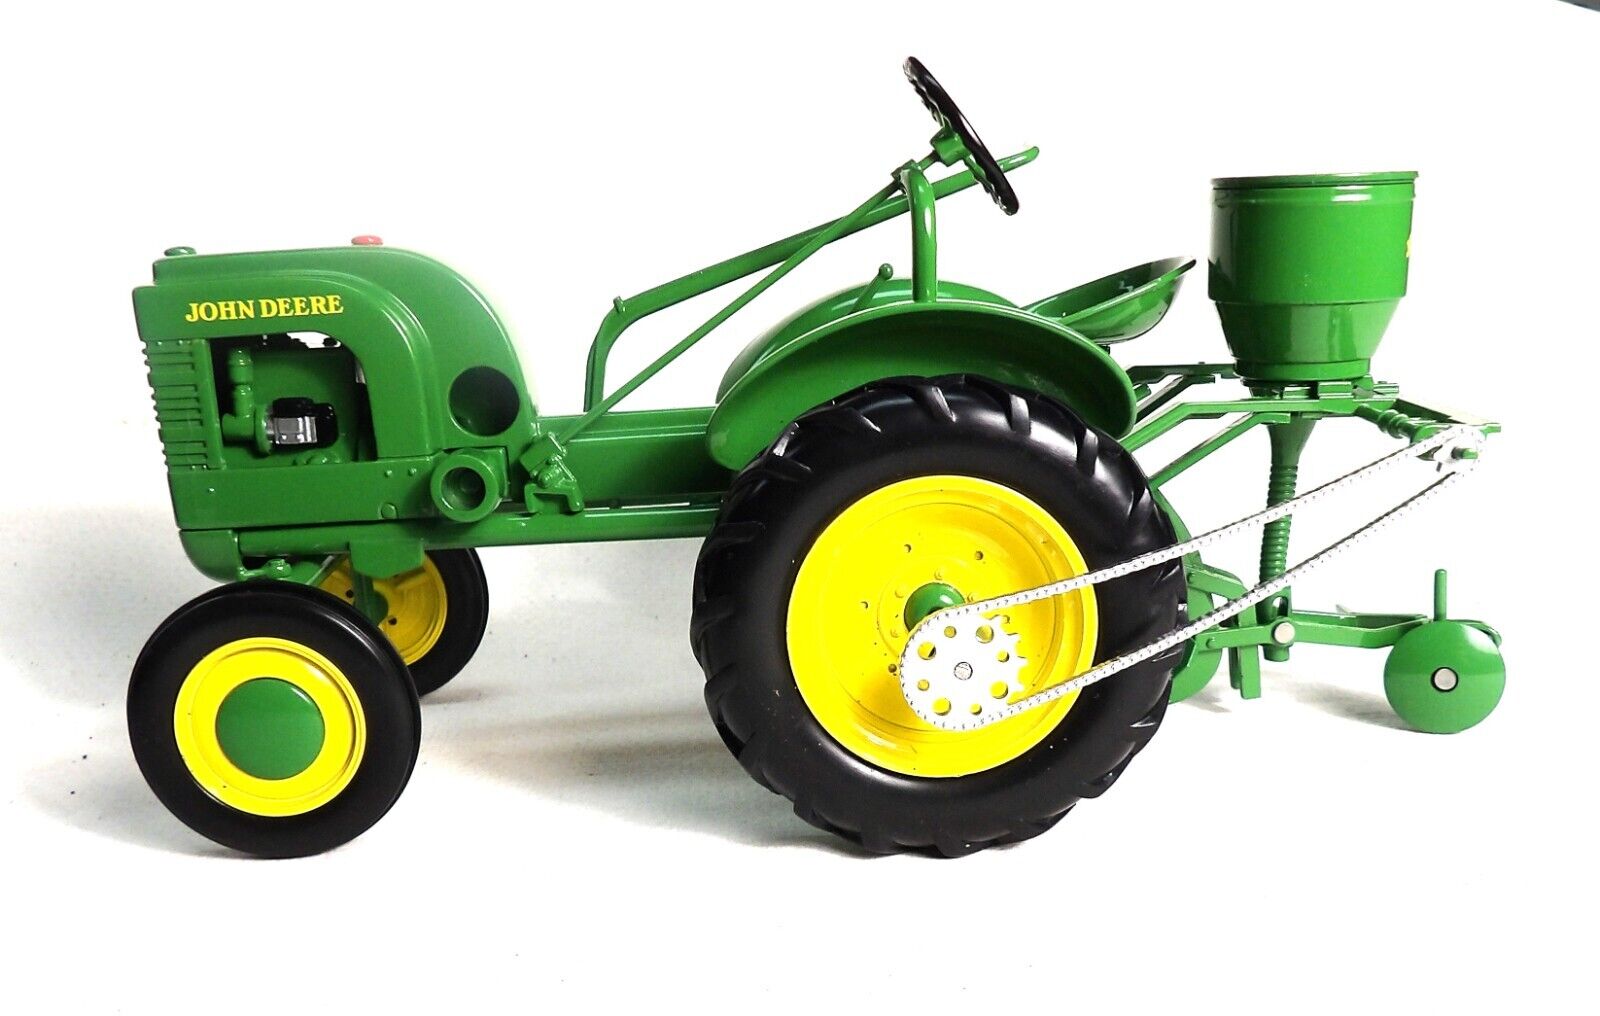 John Deere "L" tractor with L27 Lister Planter  1/16th